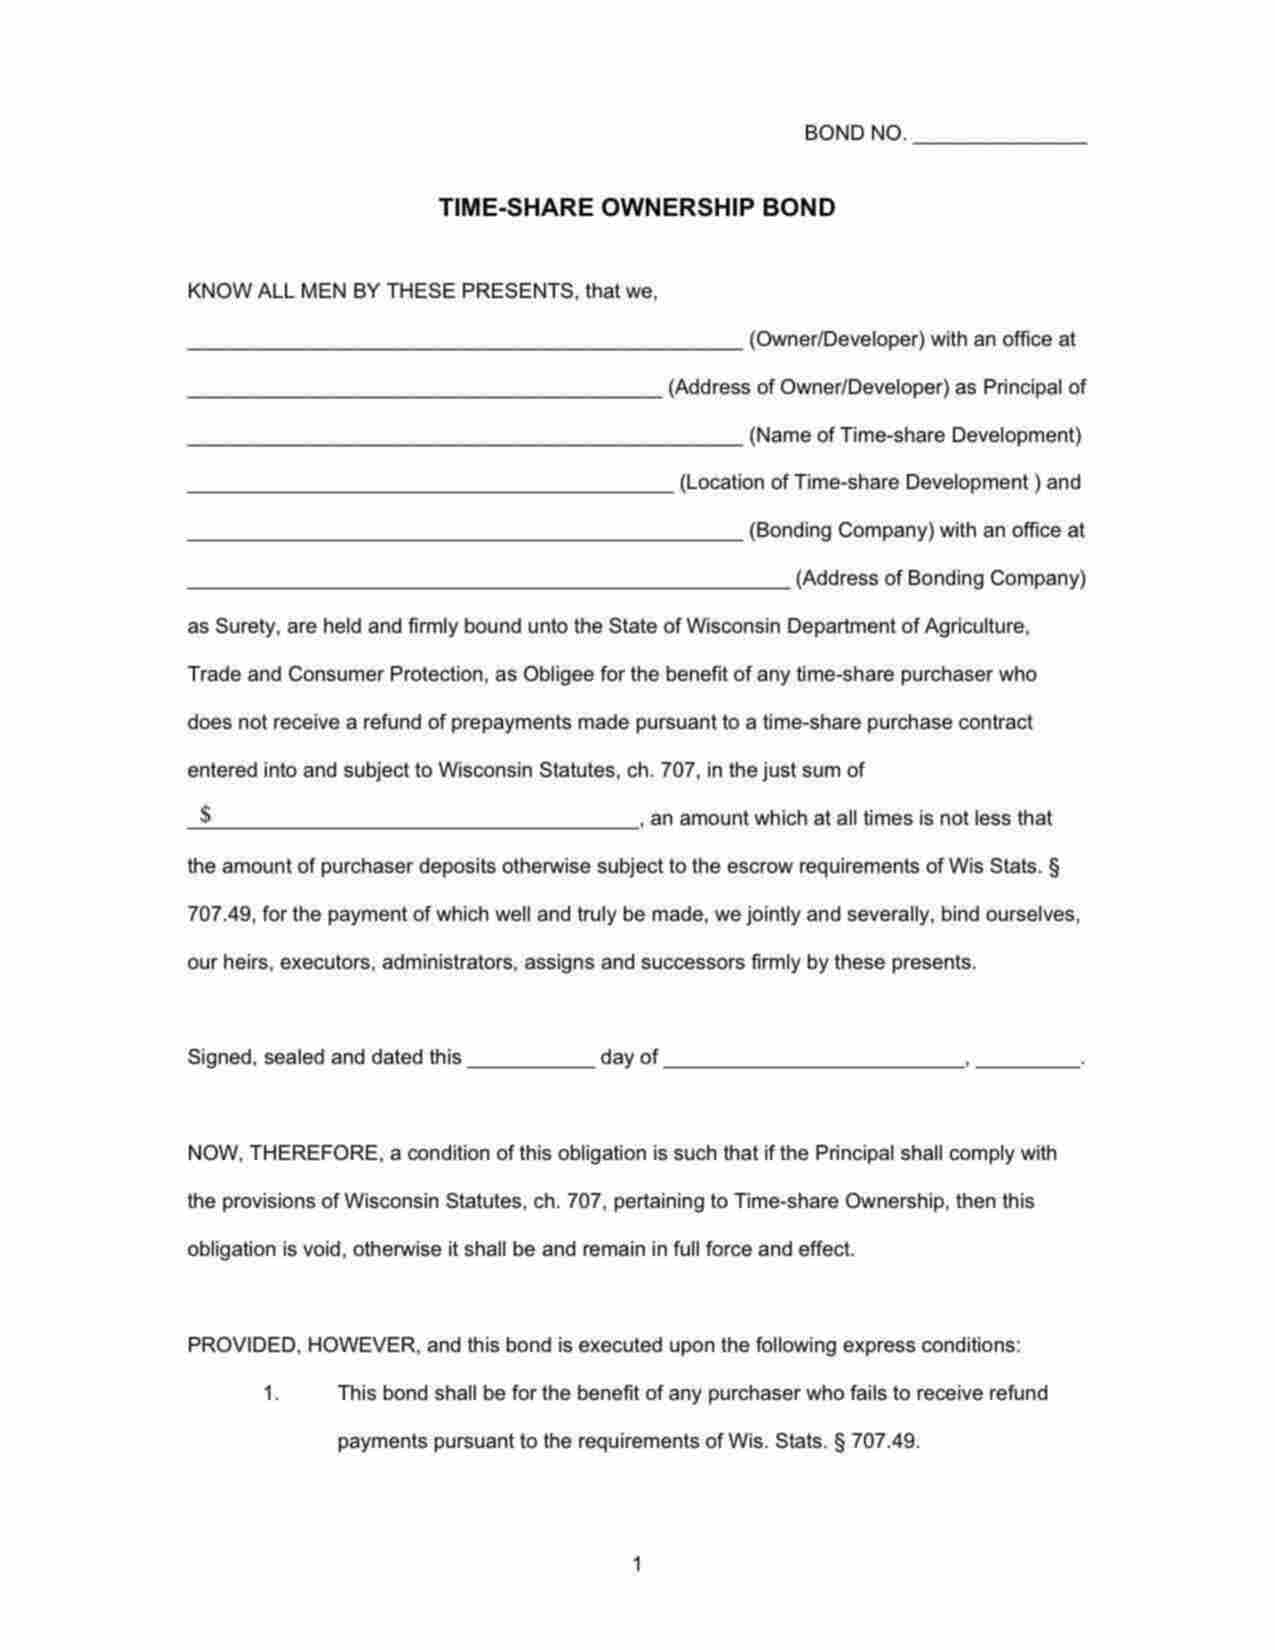 Wisconsin Time-Share Ownership Bond Form